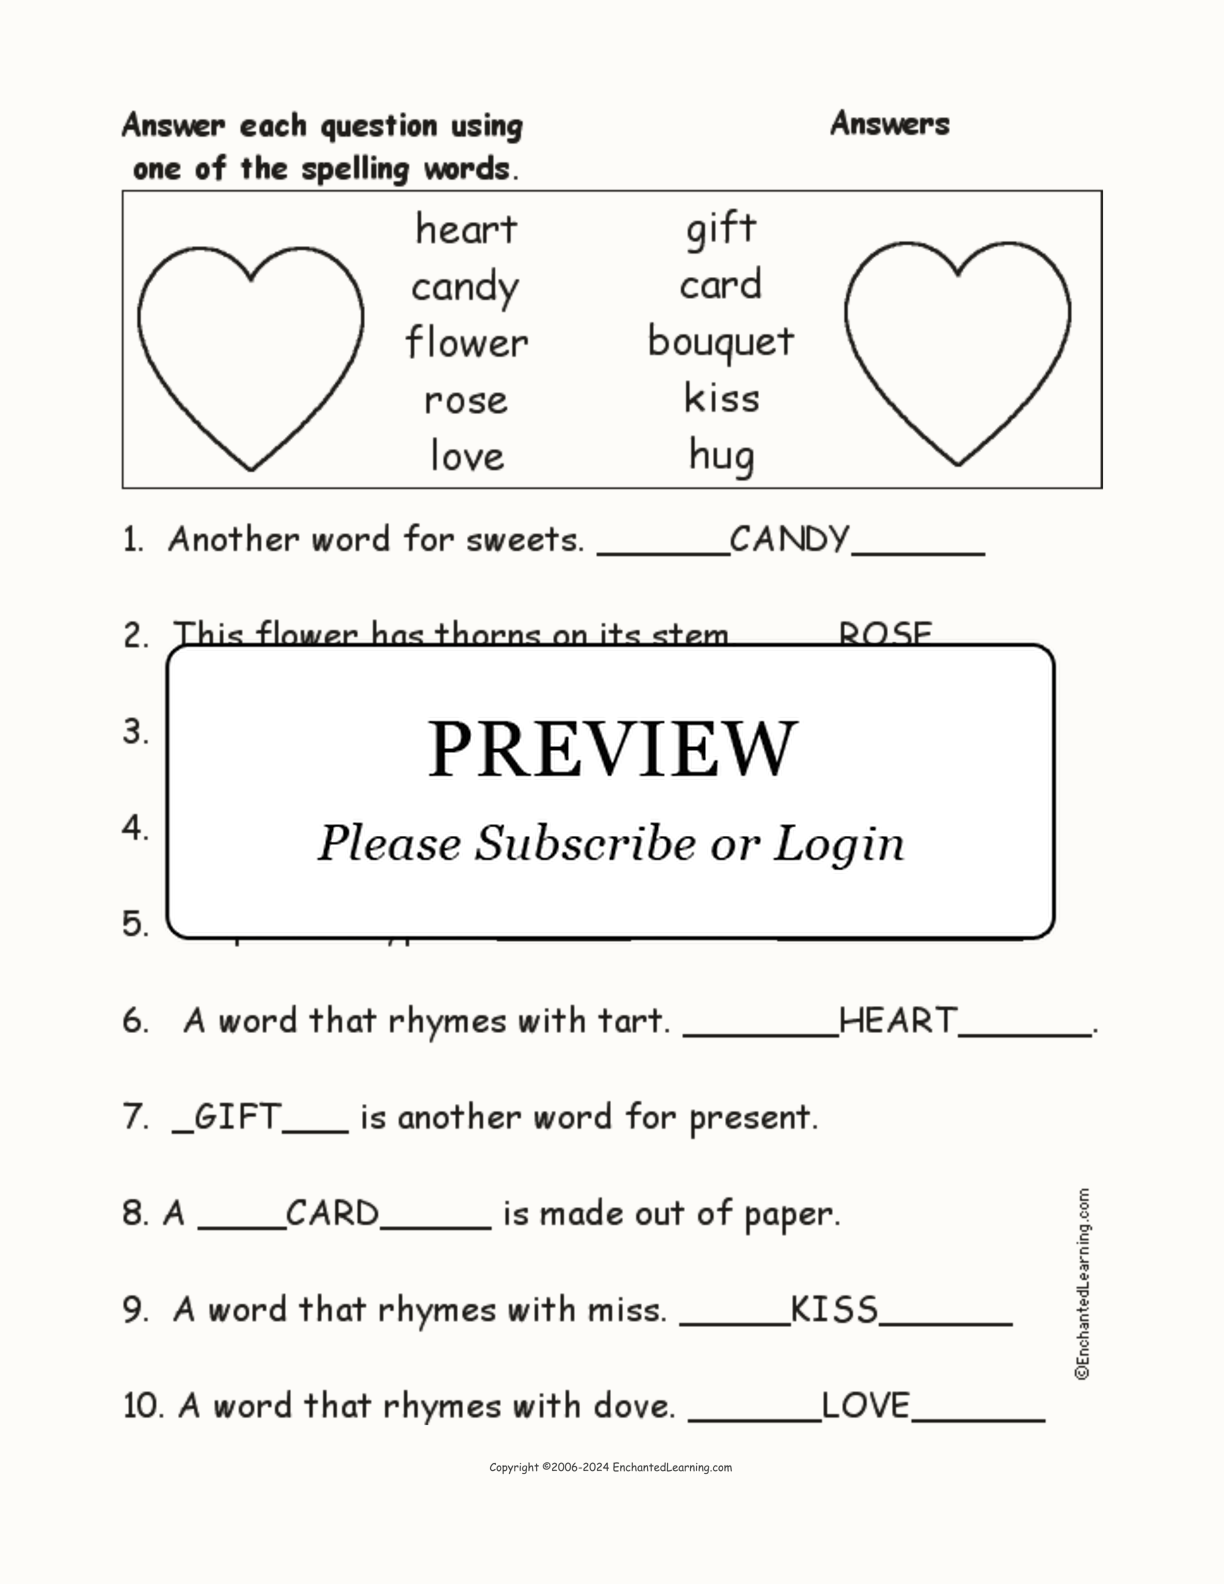 Valentine's Day Spelling Word Questions interactive worksheet page 2